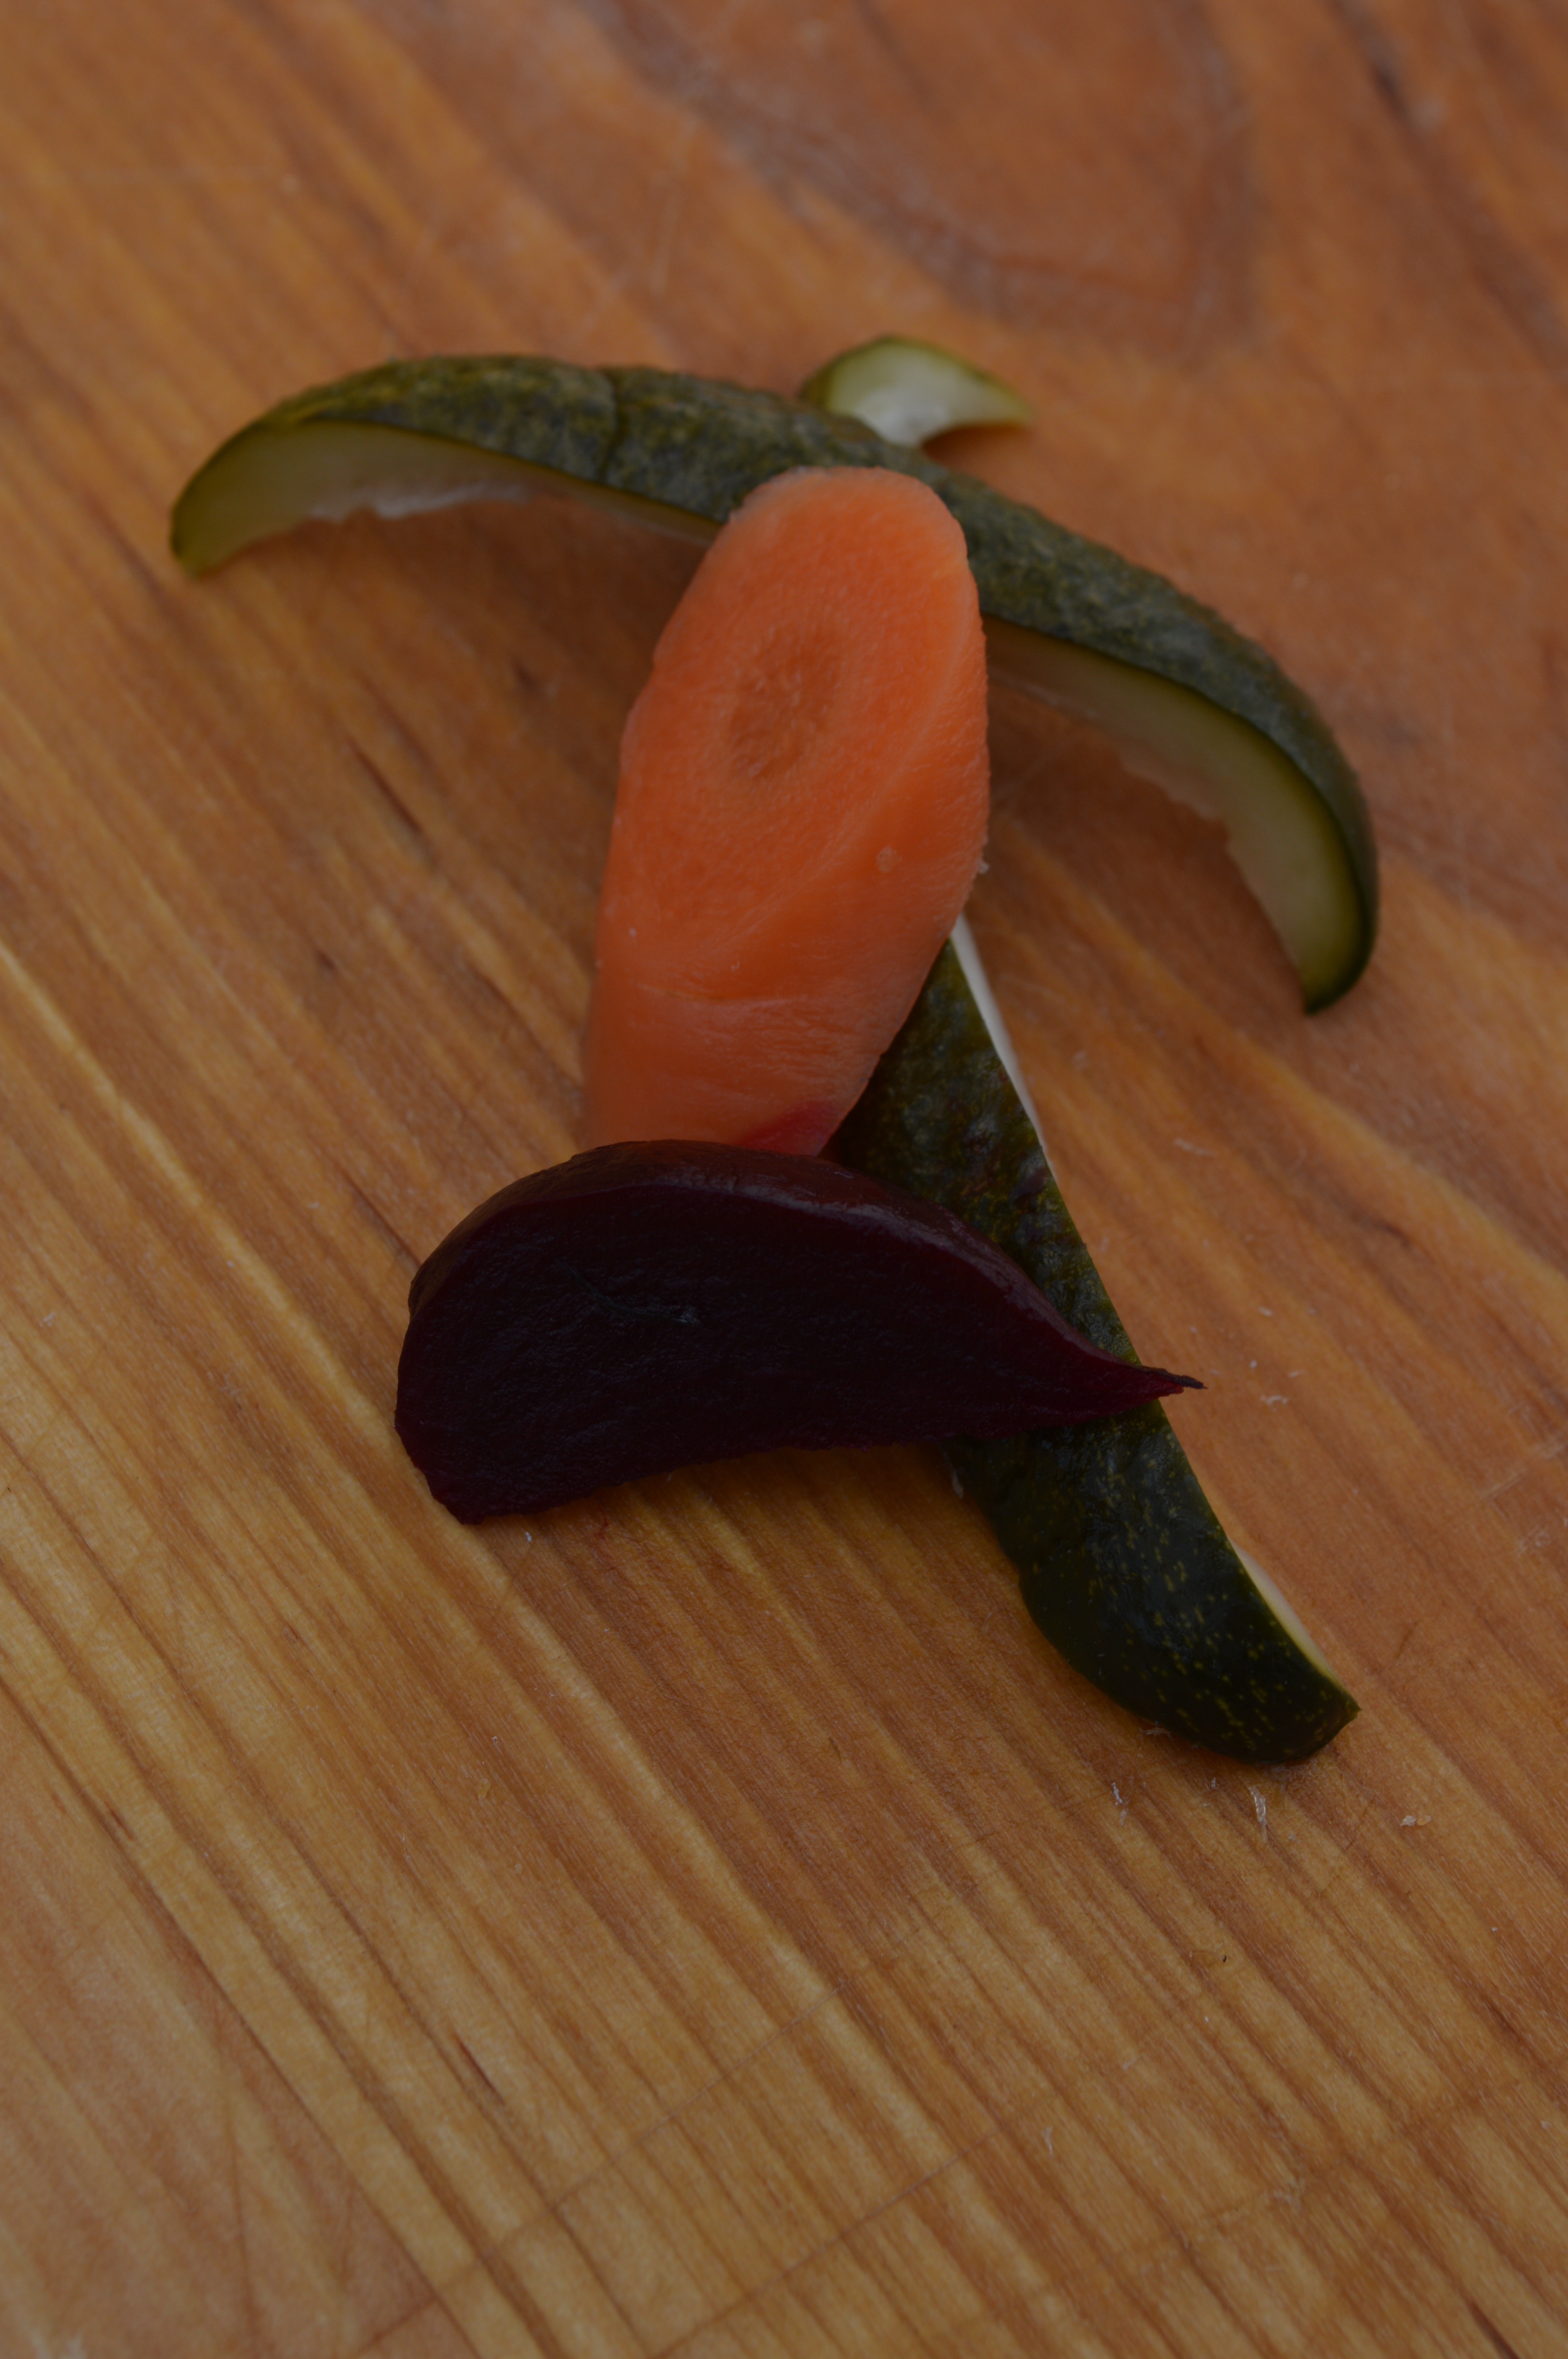 Quick-pickled cucumbers, carrots, and beets.